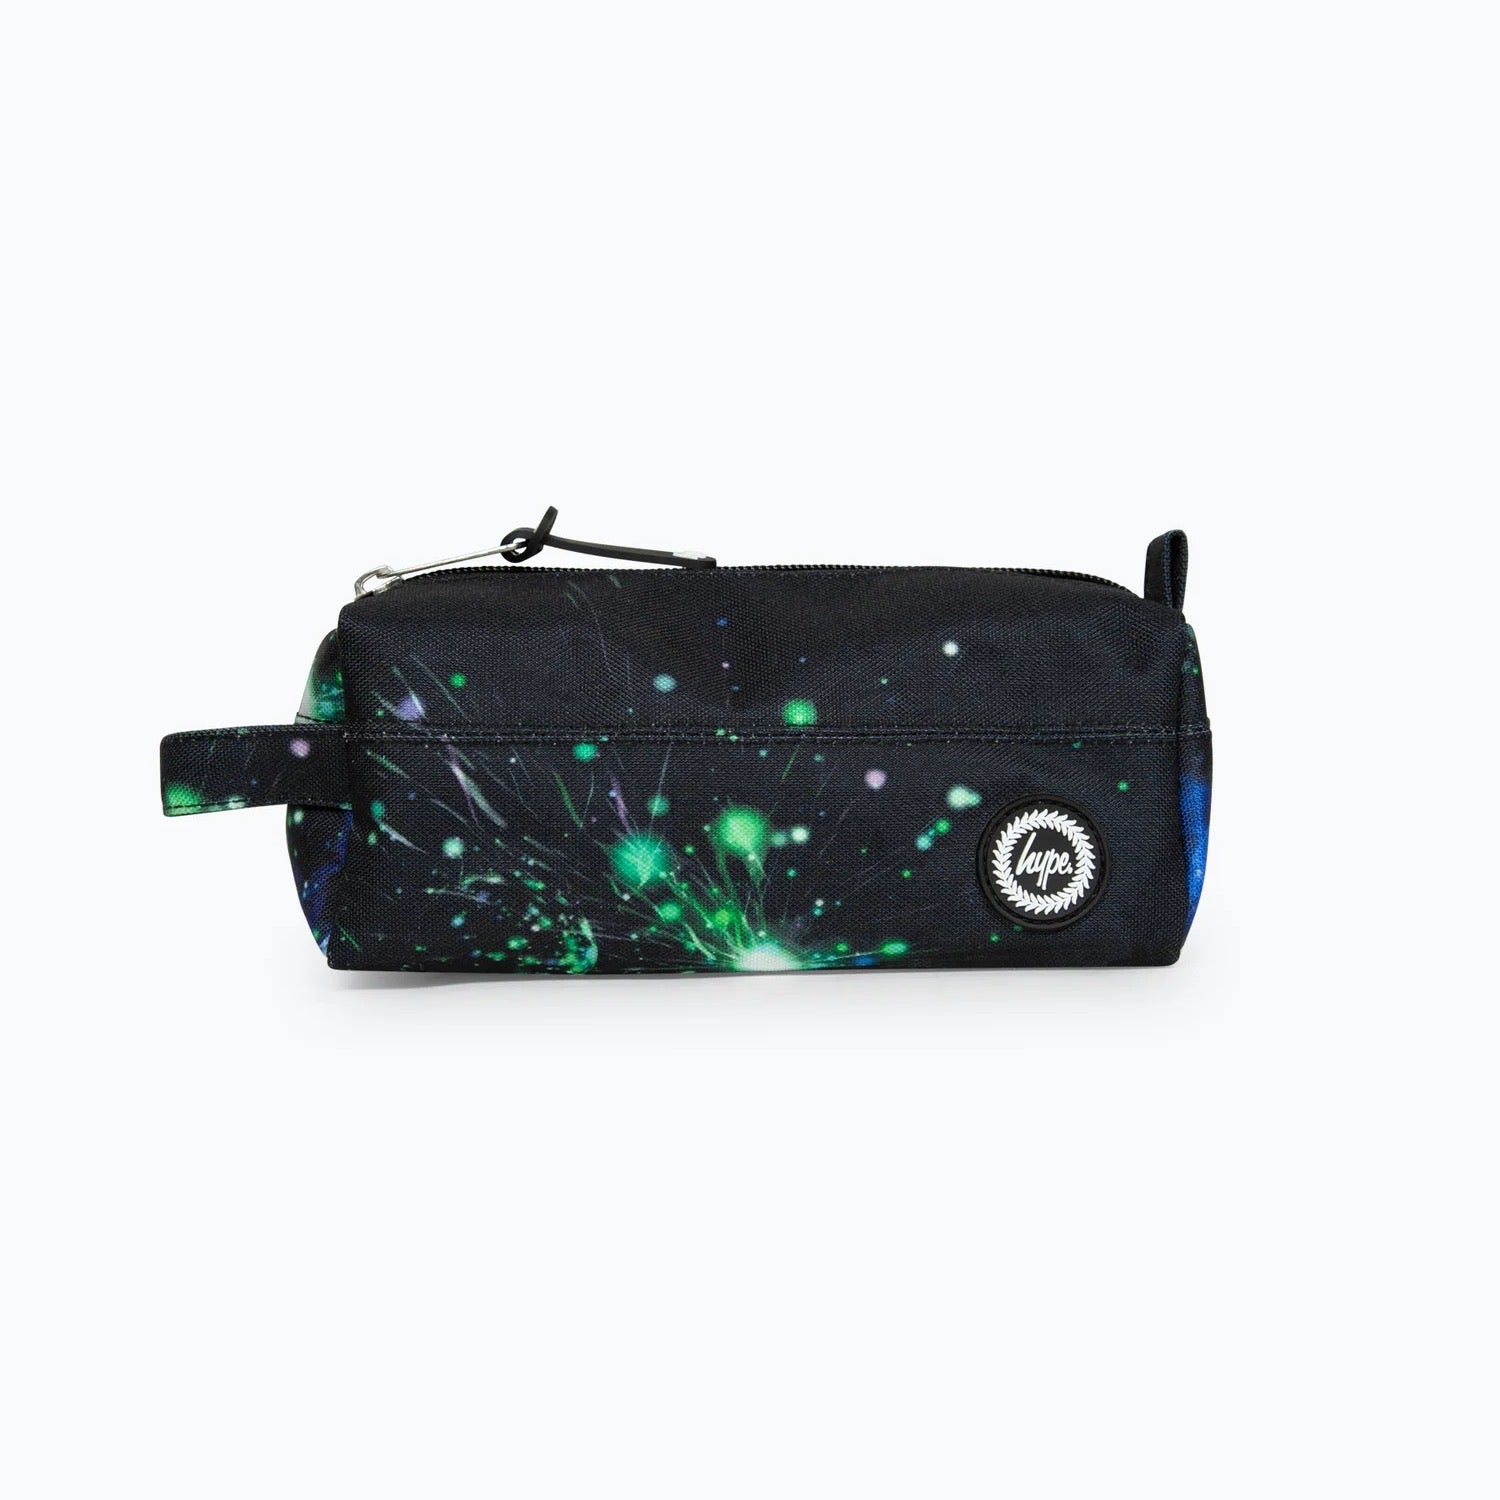 Hype Black Cosmos Pencil Case Xtlr136 Accessories ONE SIZE / Multi